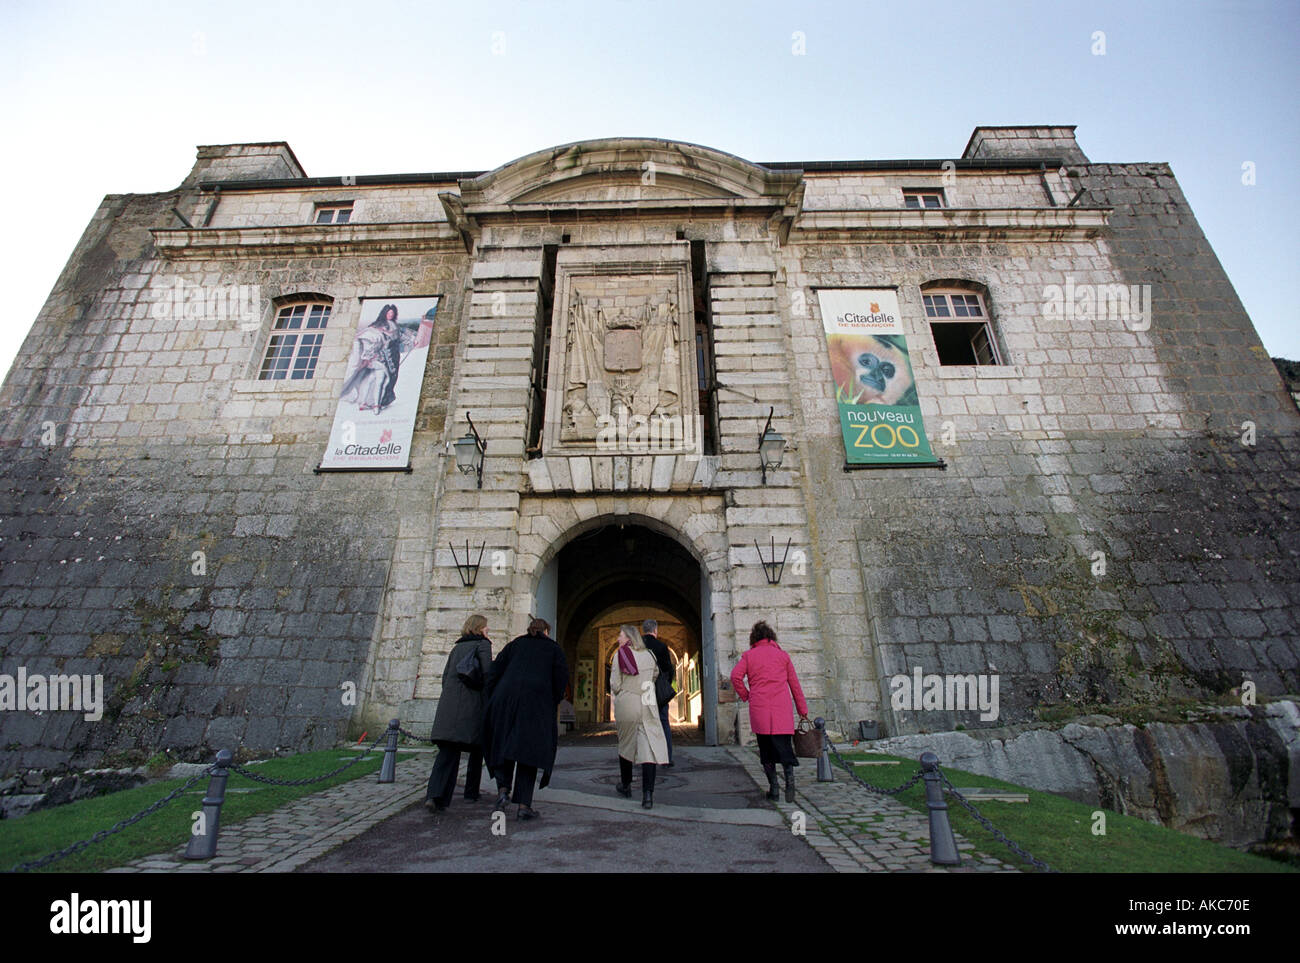 The entrance to La Citadelle de Besancon or The Citadel of Besancon in the French Comte region of France Stock Photo